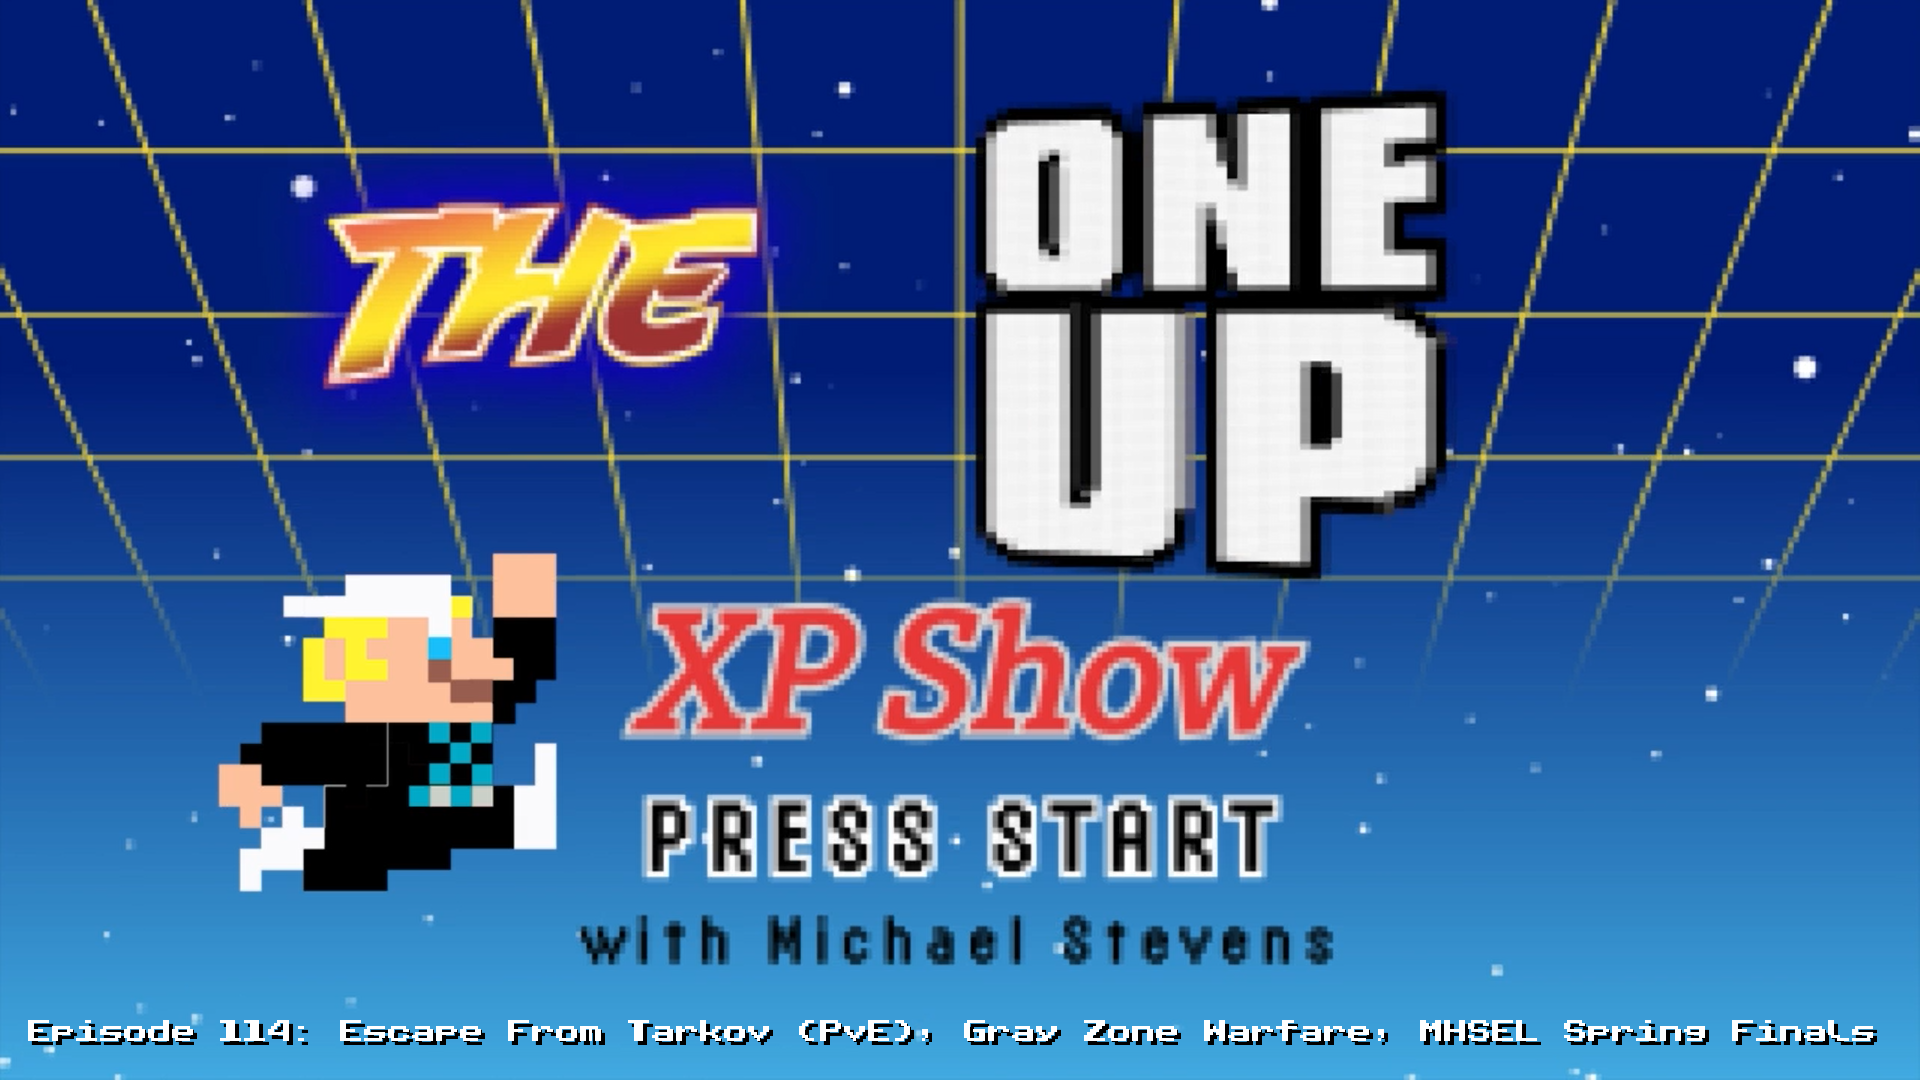 The One Up XP Show - Episode 114: Escape From Tarkov (PvE), Gray Zone Warfare, MHSEL Spring State Finals